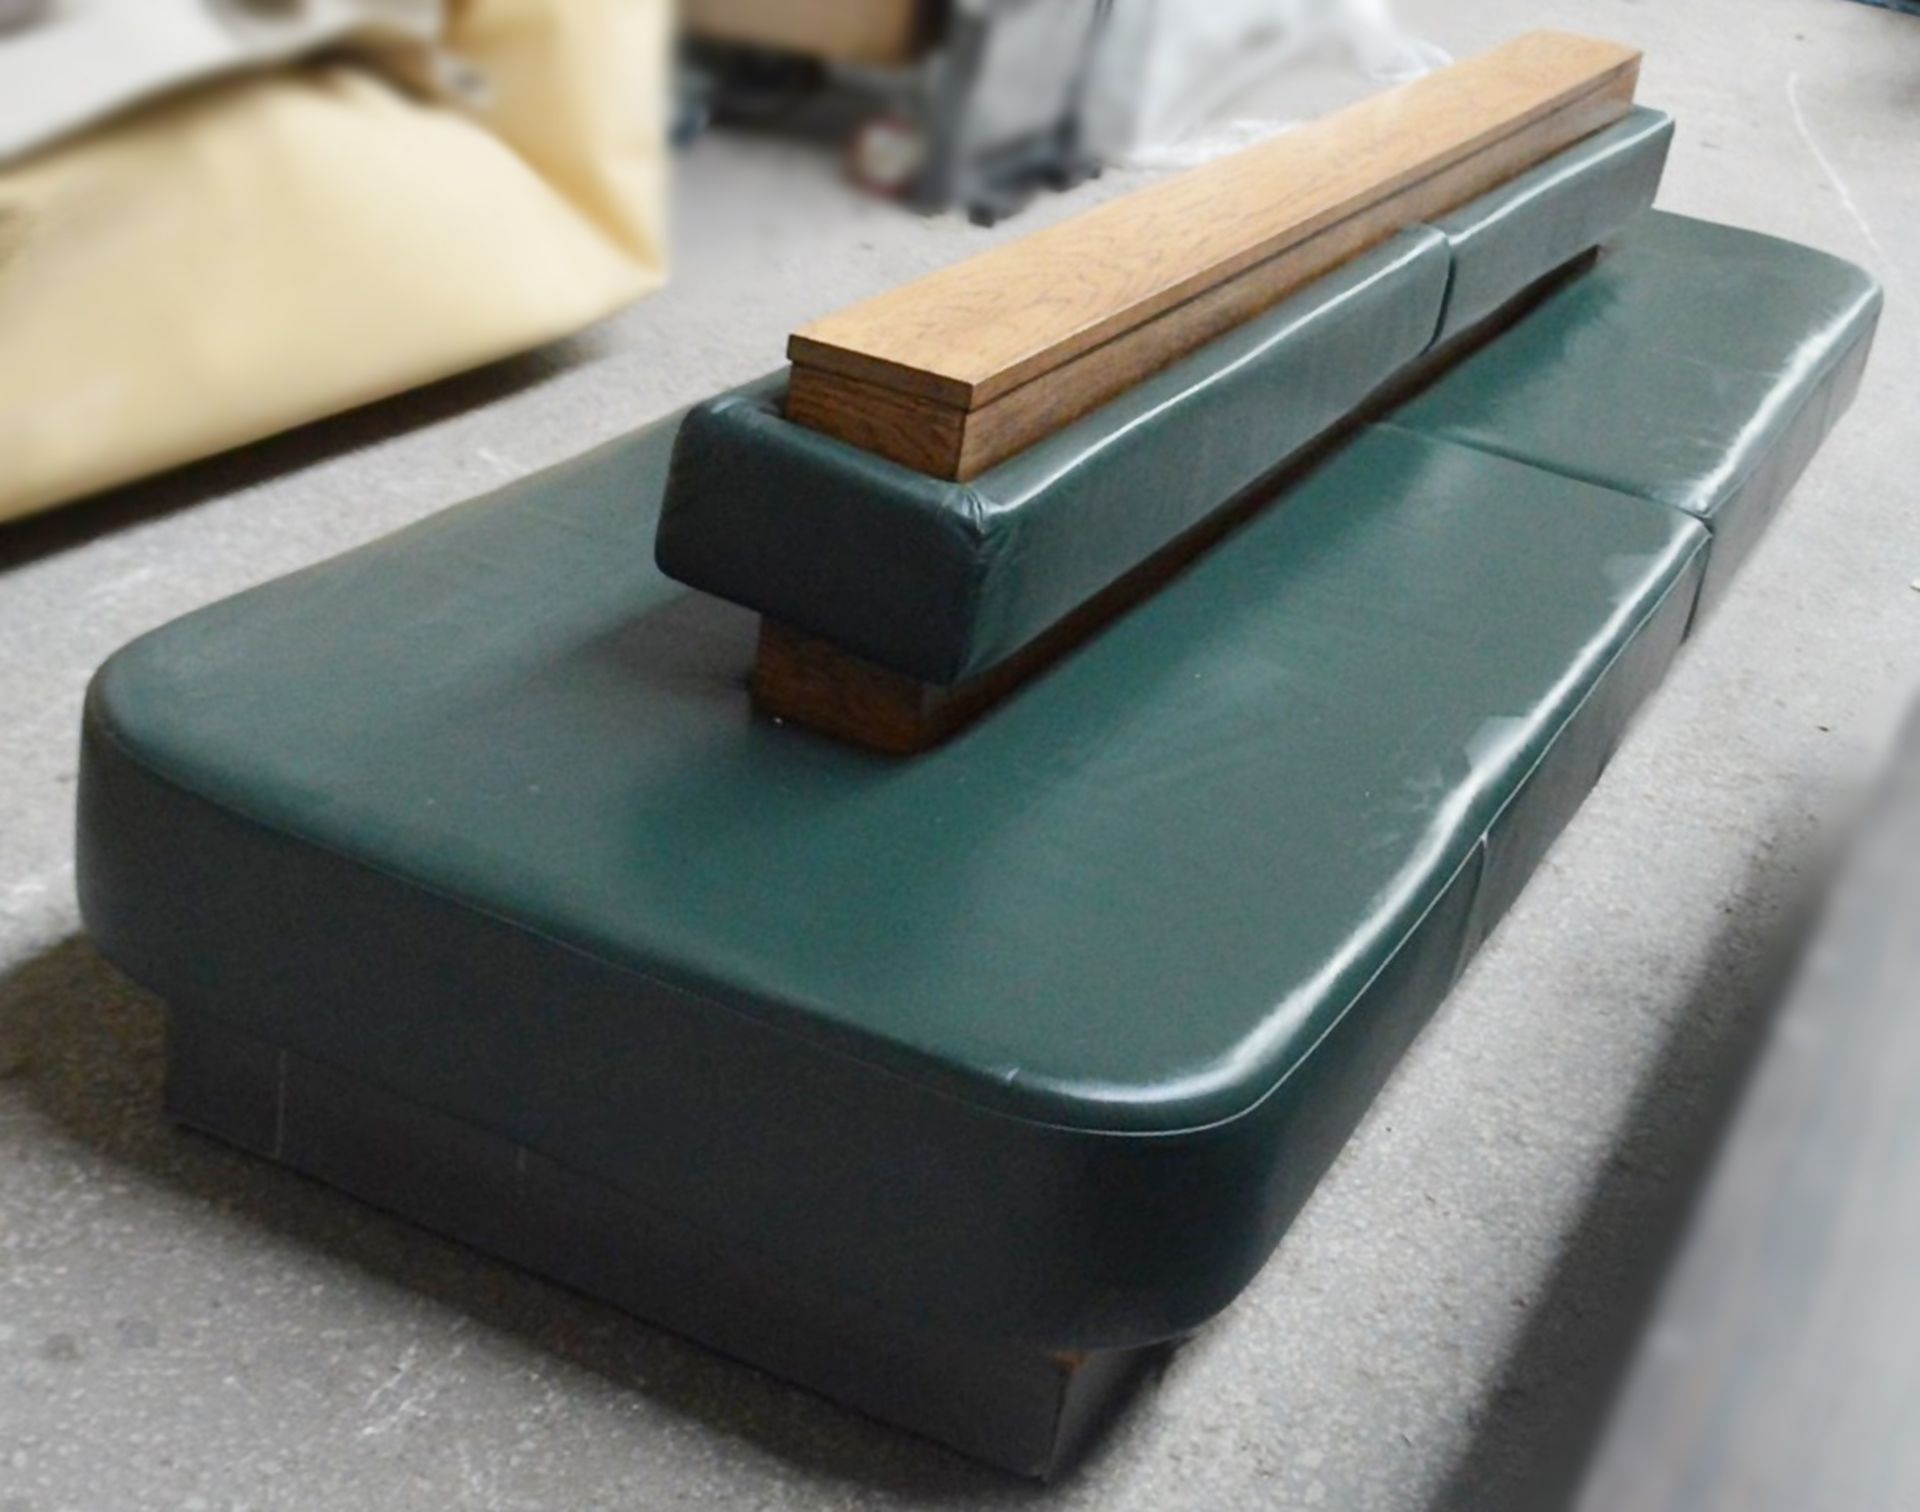 1 x Large Seating Bench Upholstered In A Green Faux Leather - Dimensions: H62 x W285 x D88cm - Image 2 of 4